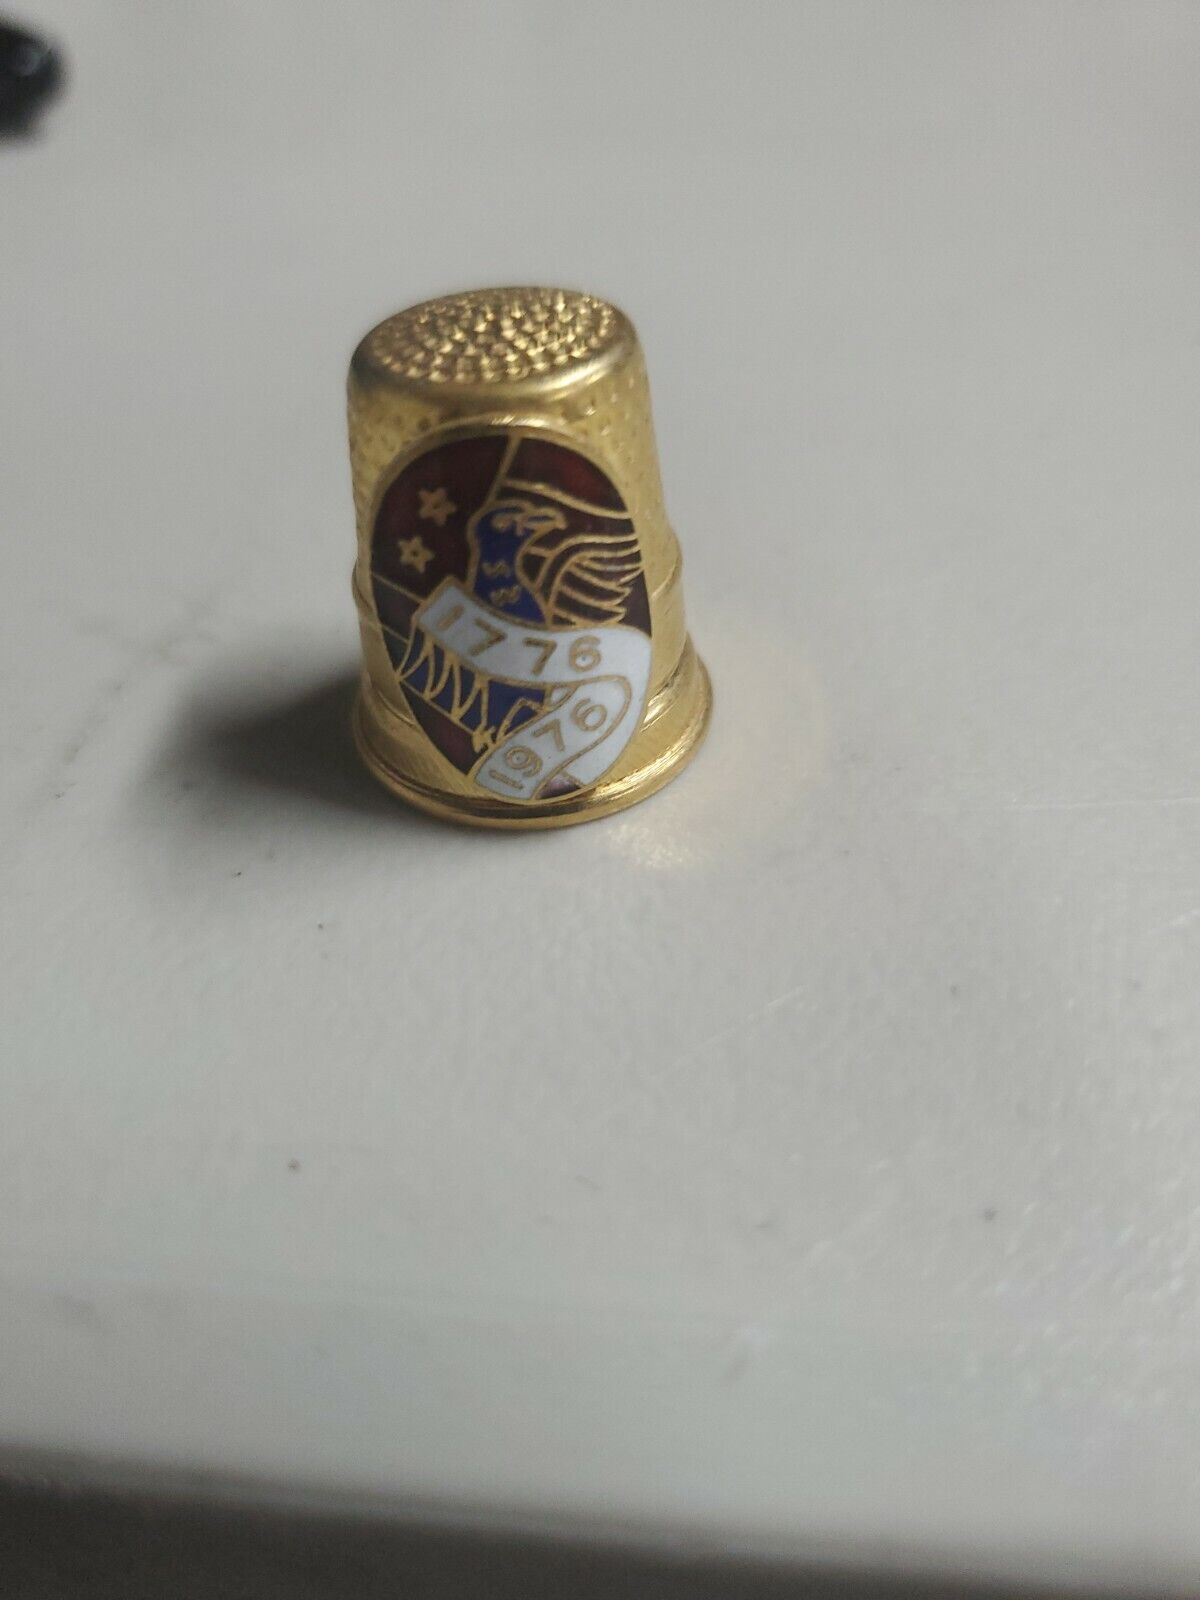 Sewing Thimble - 1776 1976 Bicentennial Gold Colored